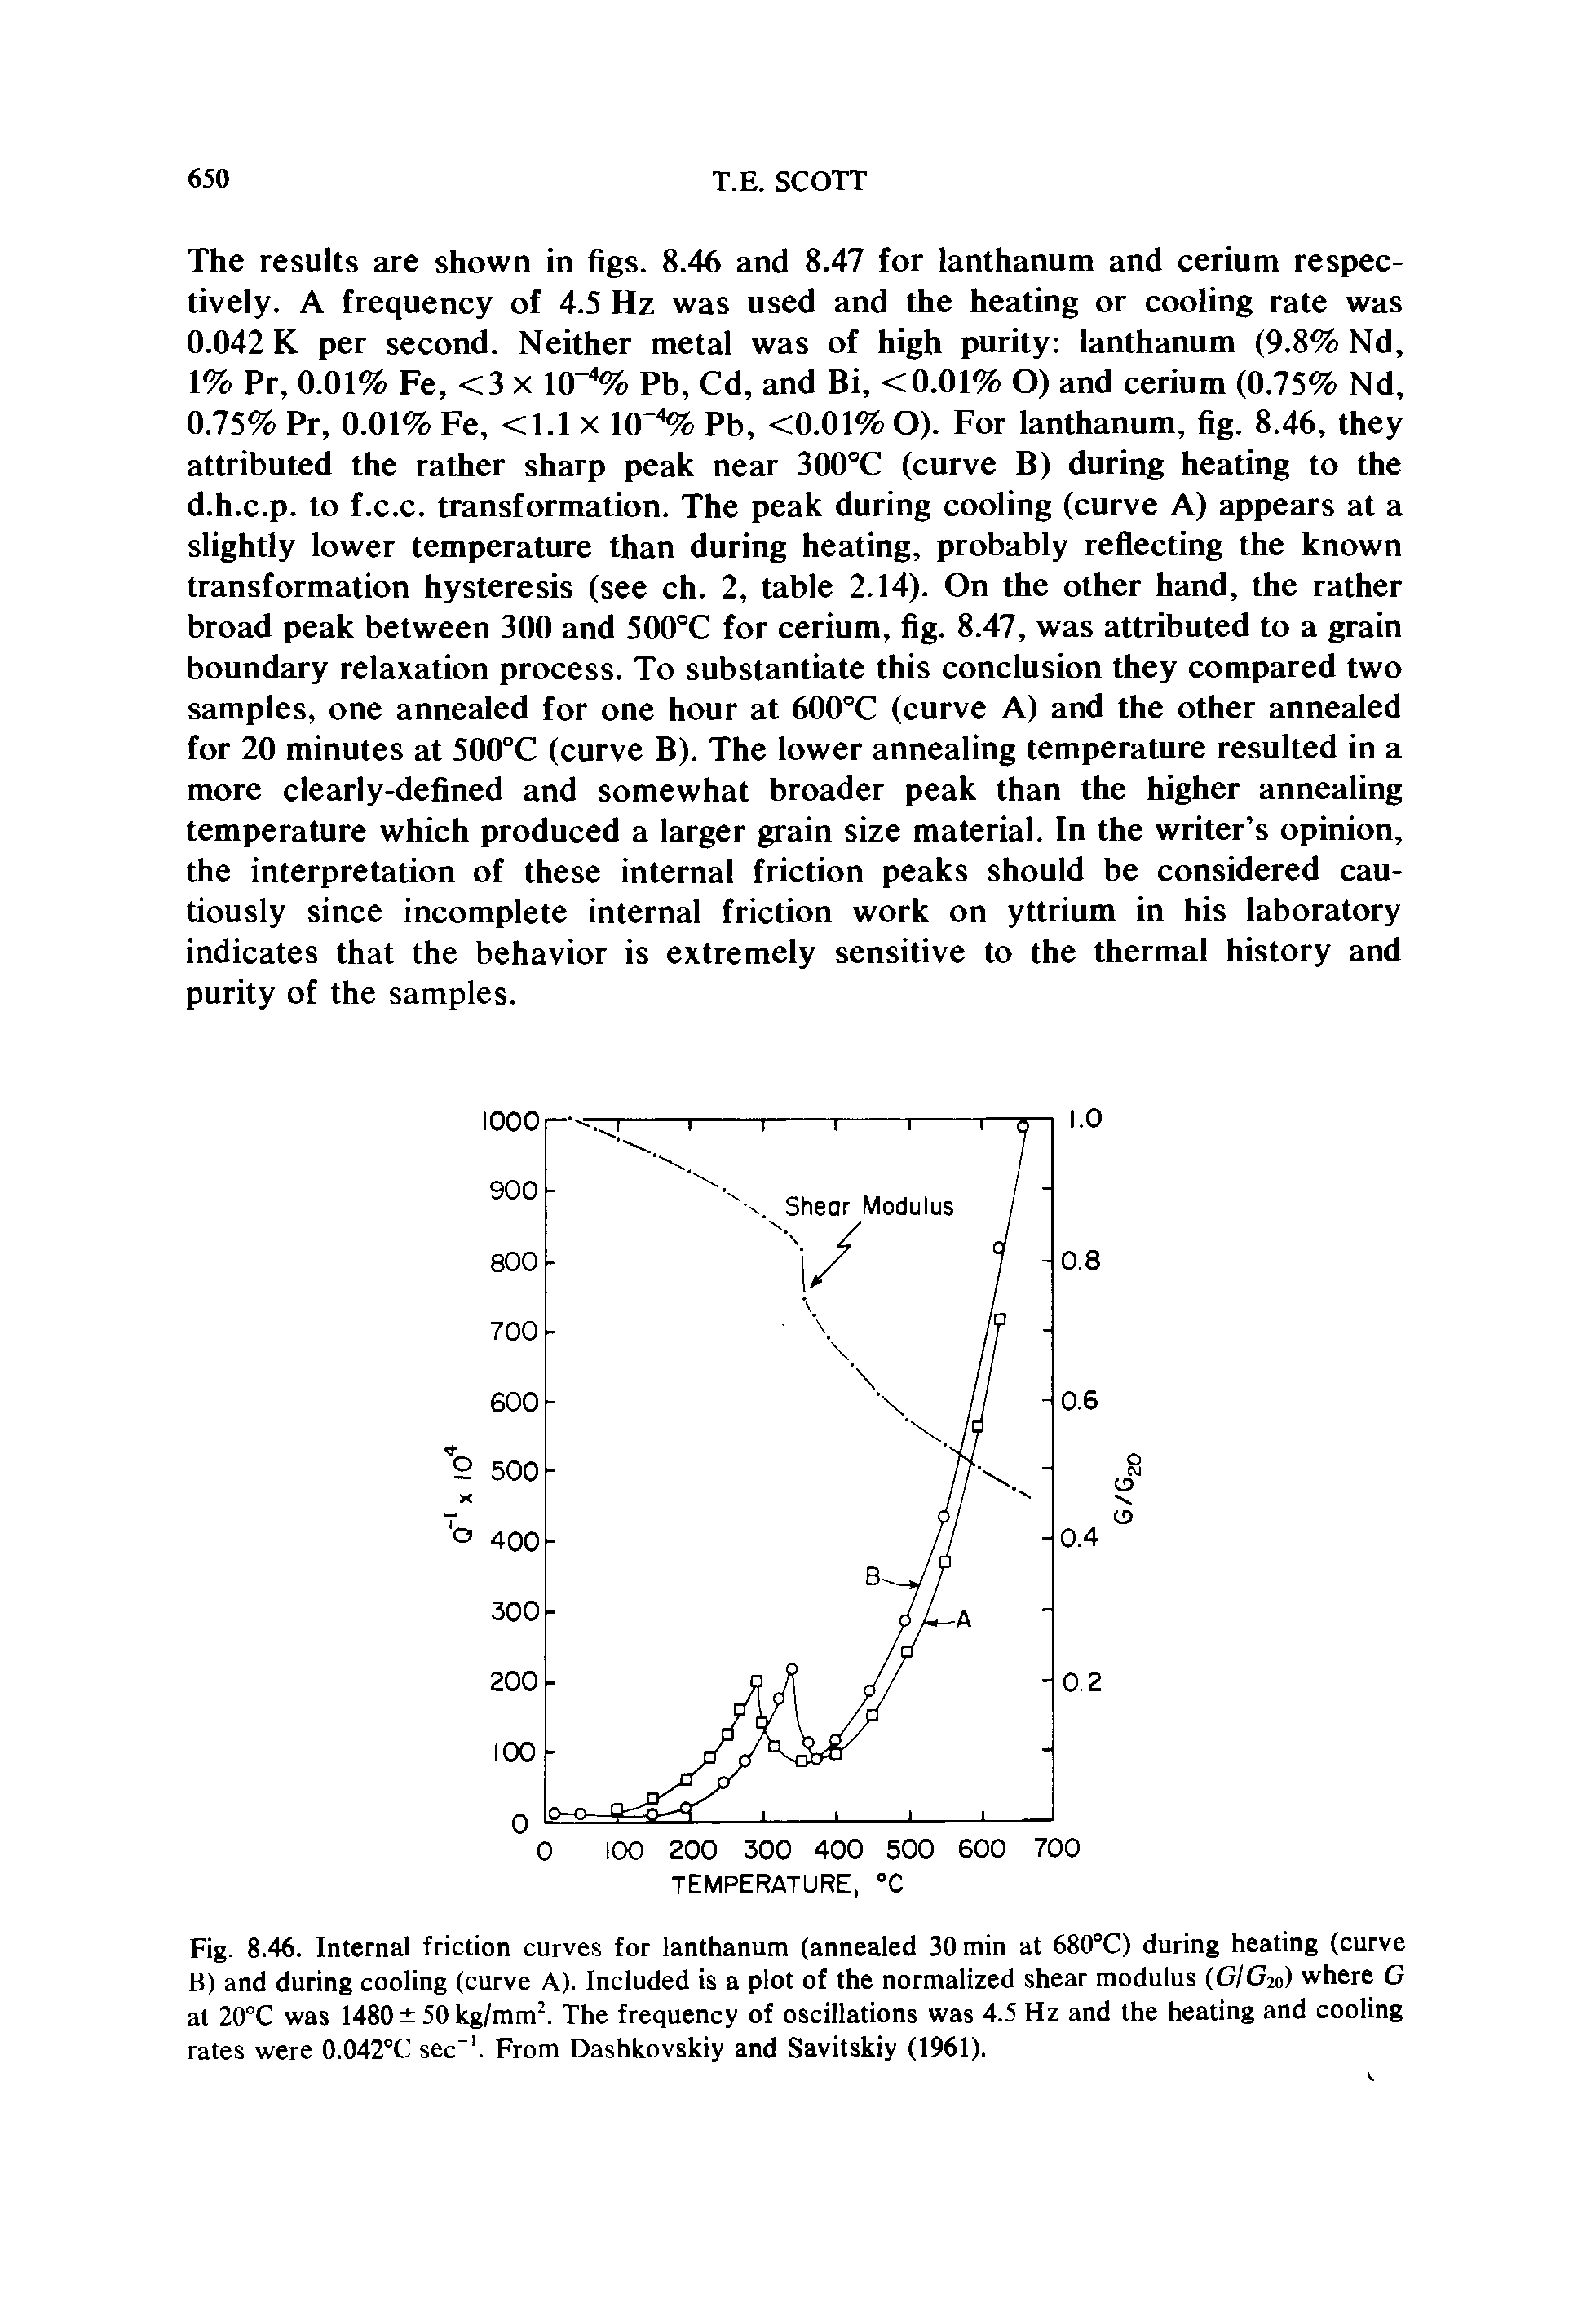 Fig. 8.46. Internal friction curves for lanthanum (annealed 30 min at 680°C) during heating (curve B) and during cooling (curve A). Included is a plot of the normalized shear modulus (GIGm) where G at 20°C was 1480 50 kg/mm. The frequency of oscillations was 4.5 Hz and the heating and cooling rates were 0.042°C sec". From Dashkovskiy and Savitskiy (1961).